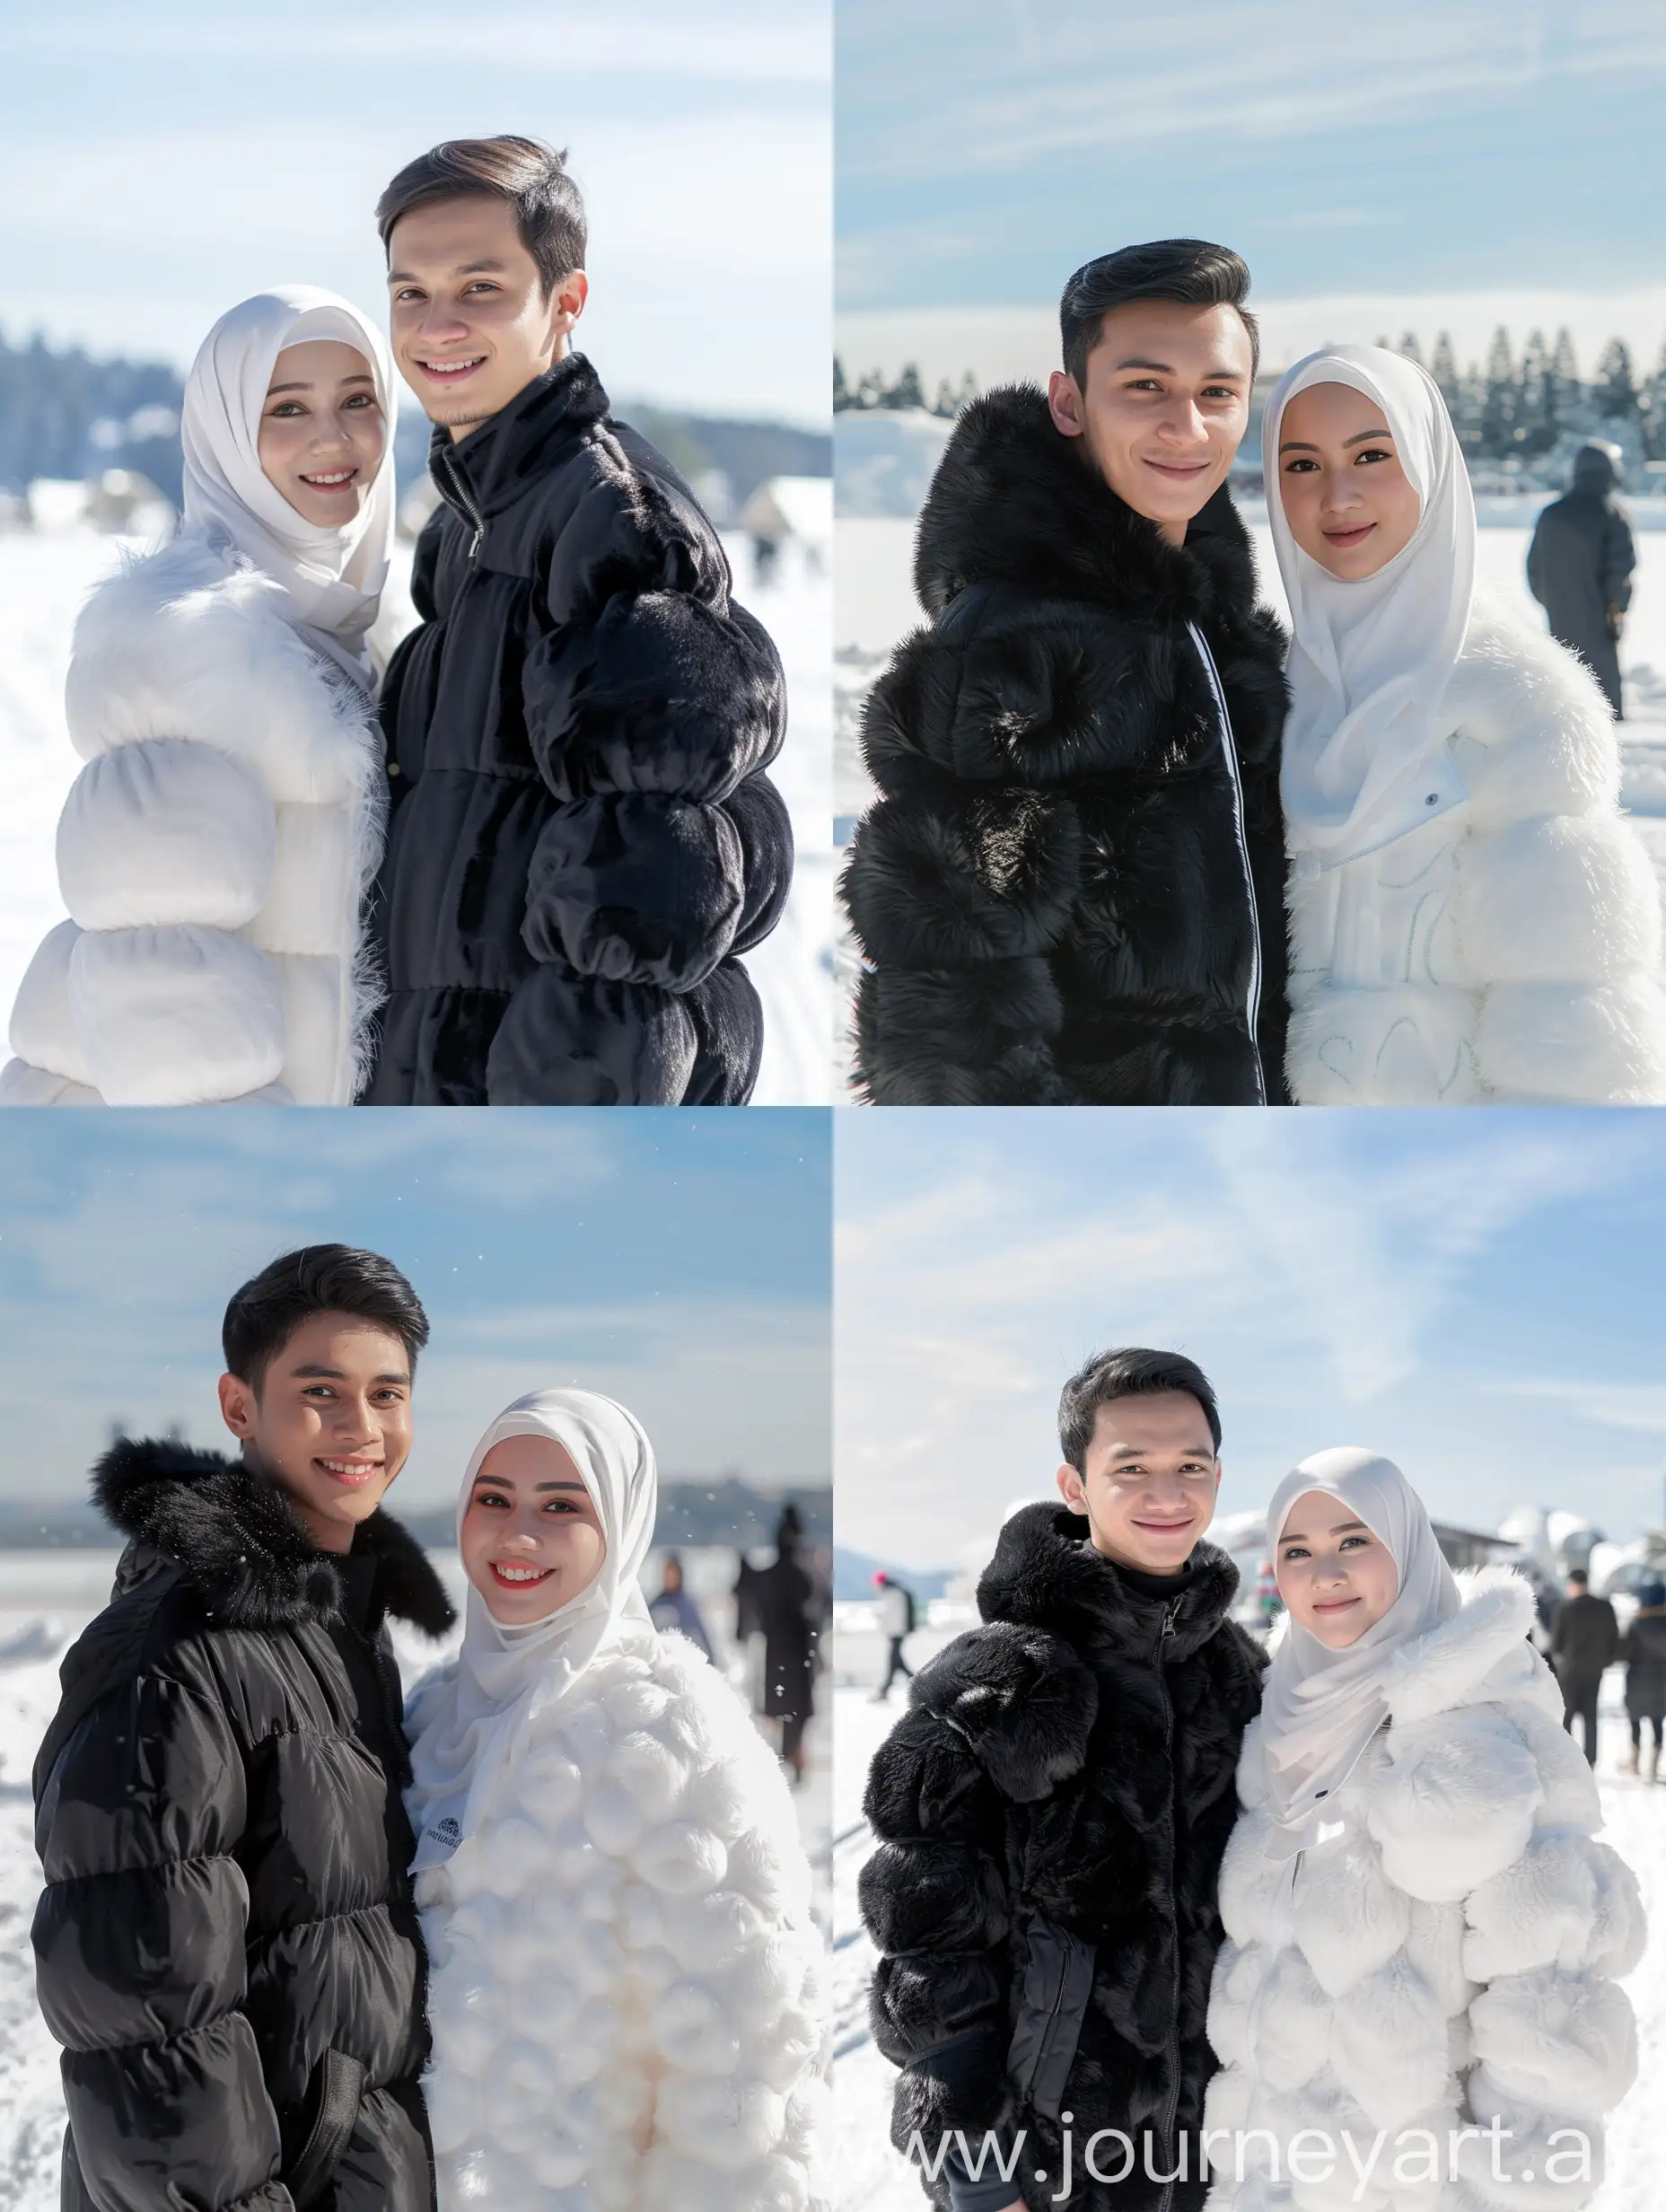 (8K, RAW Photo, Photography, Photorealistic, Realistic, Highest Quality, Intricate Detail), Medium photo of 25 year old Indonesian man, fit, ideal body, oval face, white skin, natural skin, medium hair, wearing a black furry bubble jacket season cold, side by side with a 25 year old Indonesian woman wearing a white hijab, white fluffy winter bubble jacket, they are smiling facing the camera, their eyes are looking at the camera, the corners of their eyes are parallel to the view in the snow behind people walking beautiful clear blue and white sky like real